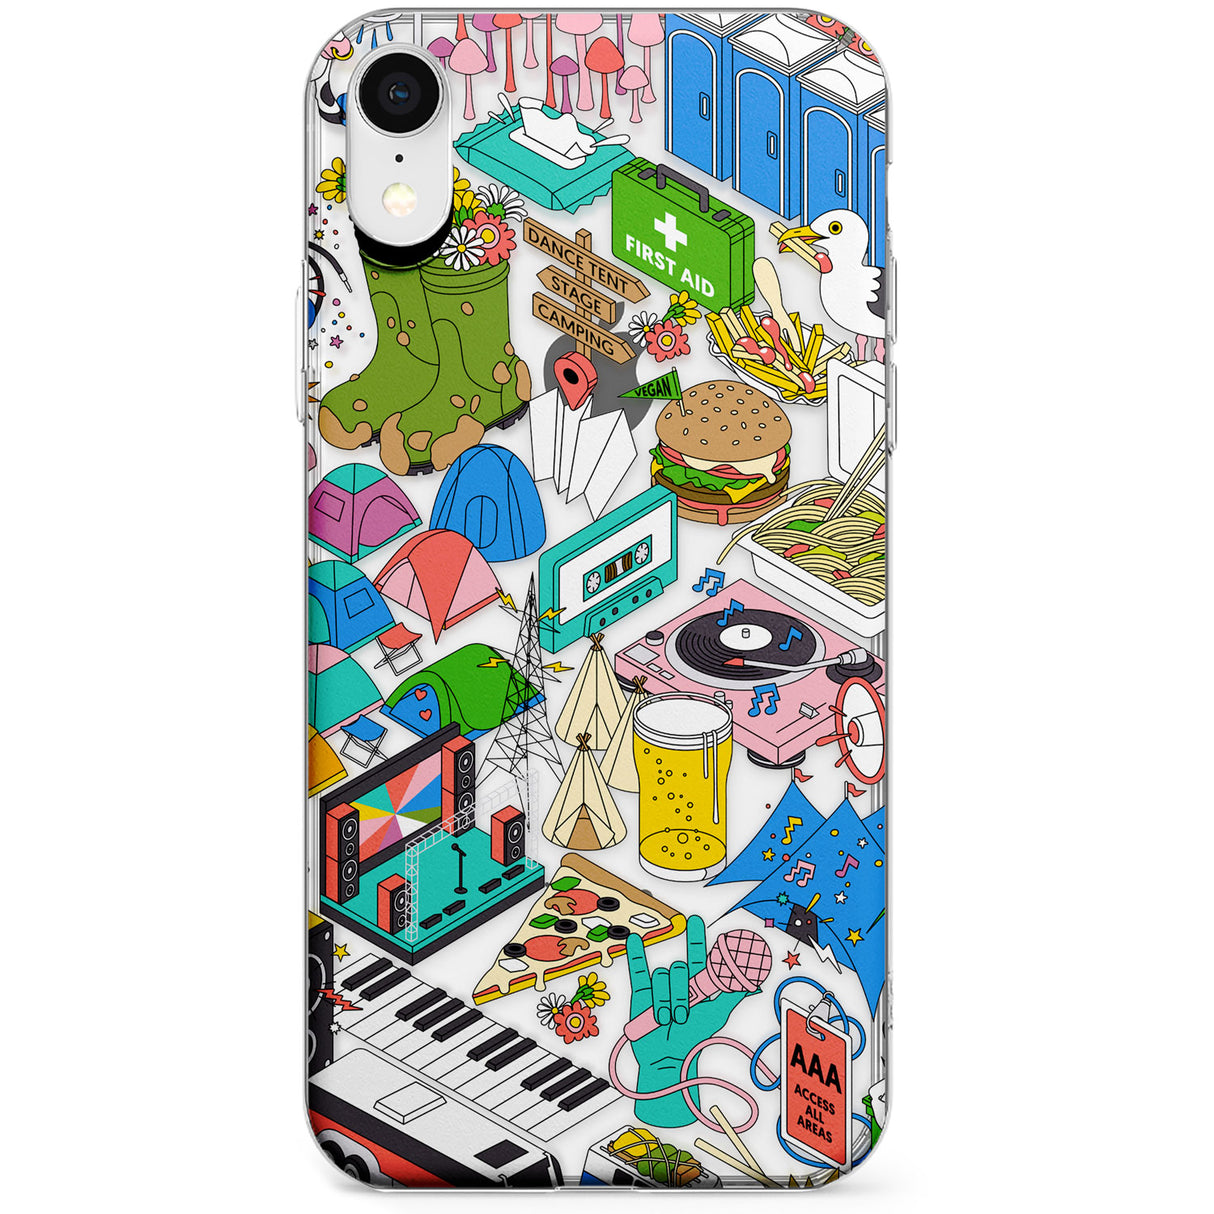 Festival Frenzy Phone Case for iPhone X, XS Max, XR